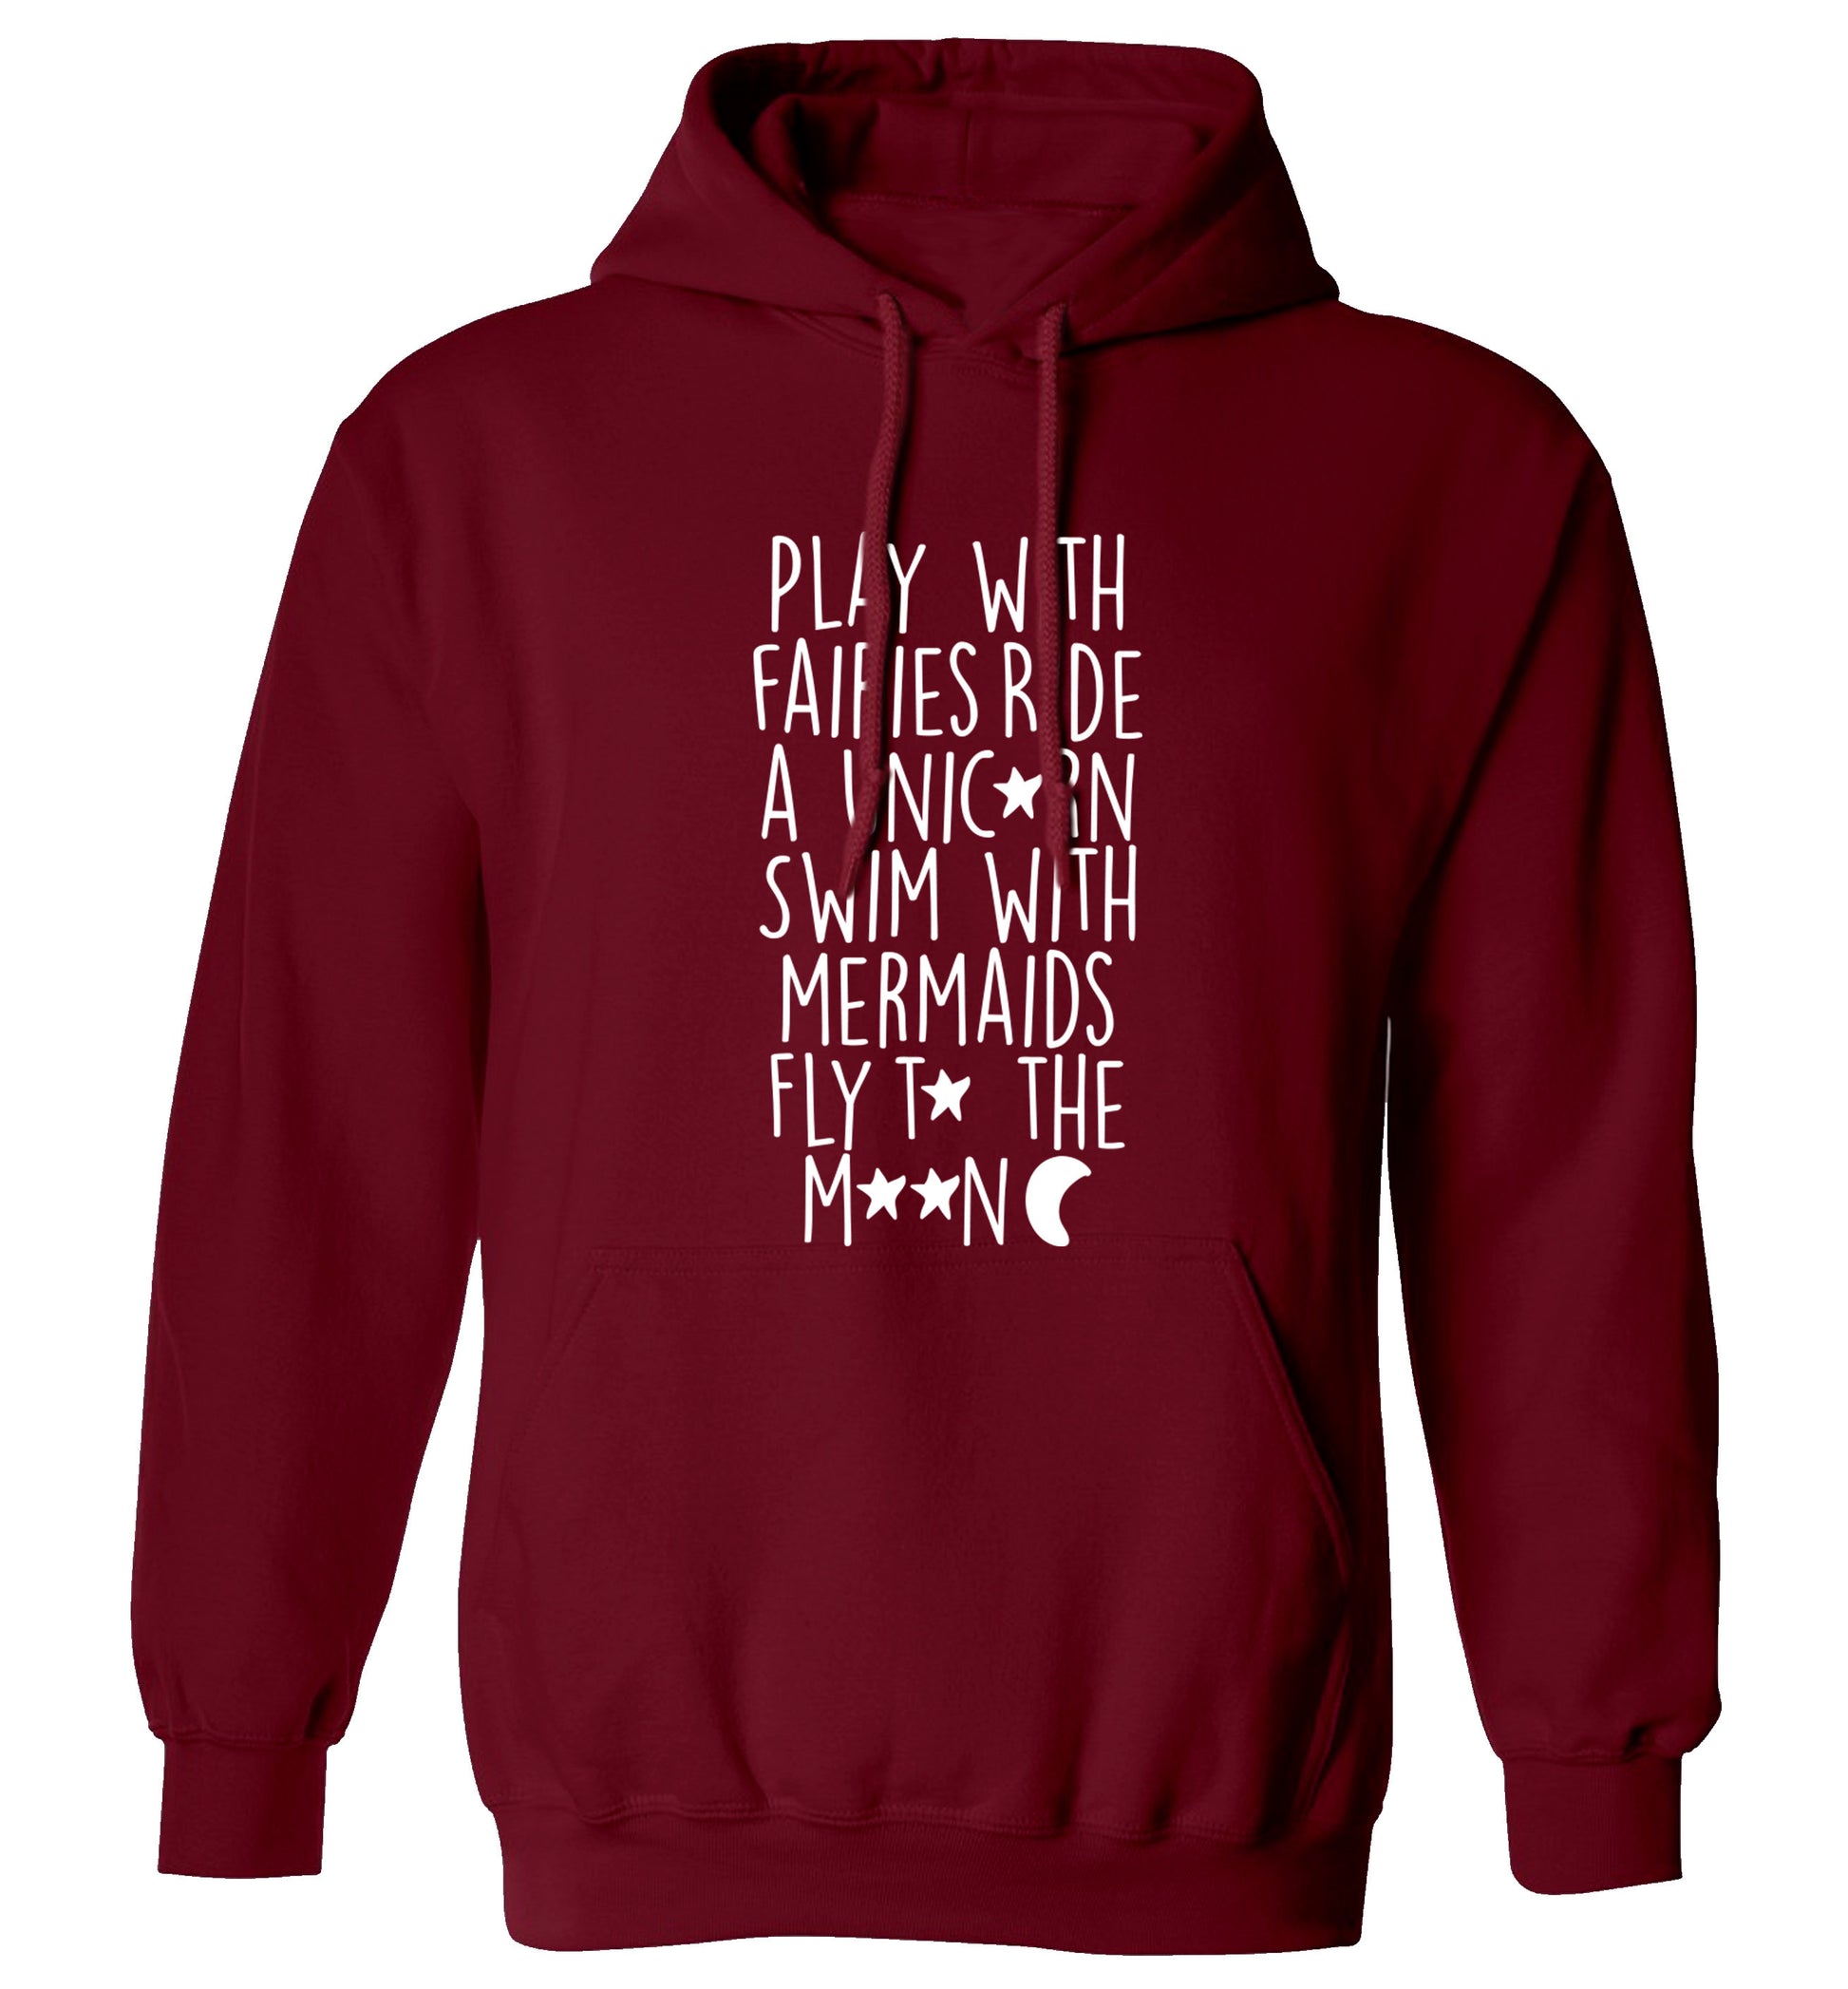 Play with fairies ride a unicorn swim with mermaids fly to the moon adults unisex maroon hoodie 2XL